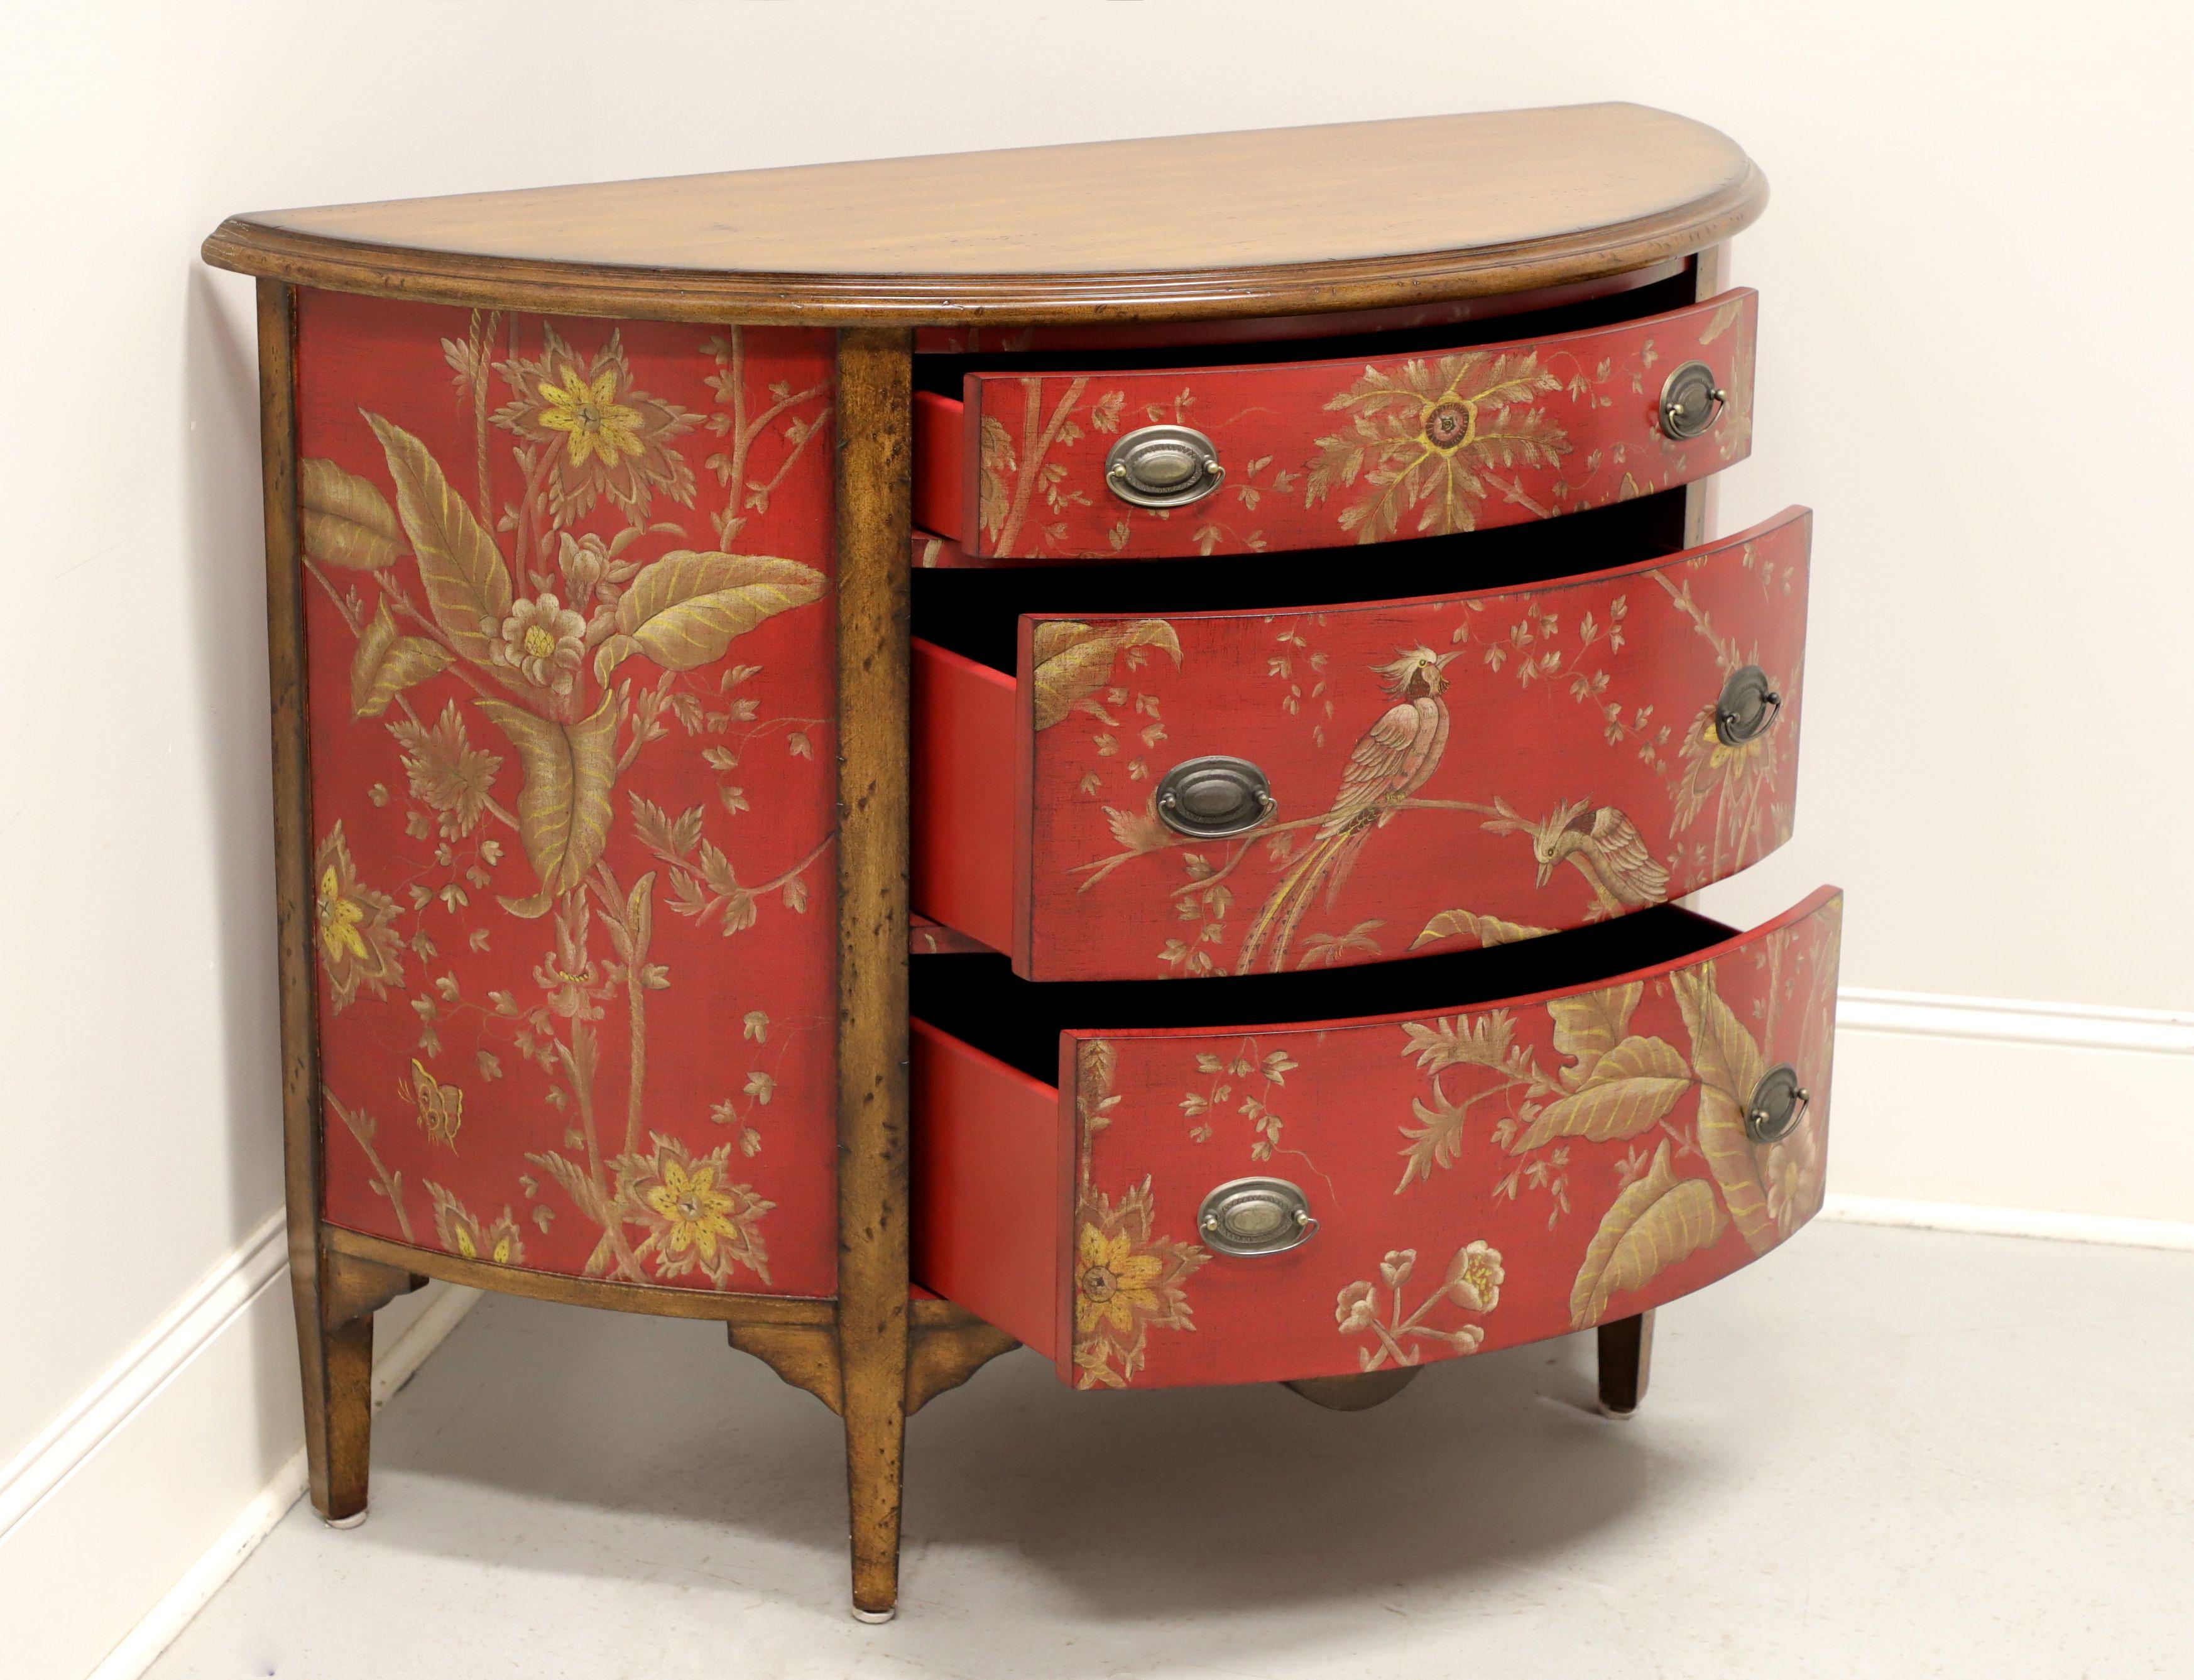 East Asian Late 20th Century Red Painted with Foliate & Avian Themes Demilune Commode Chest